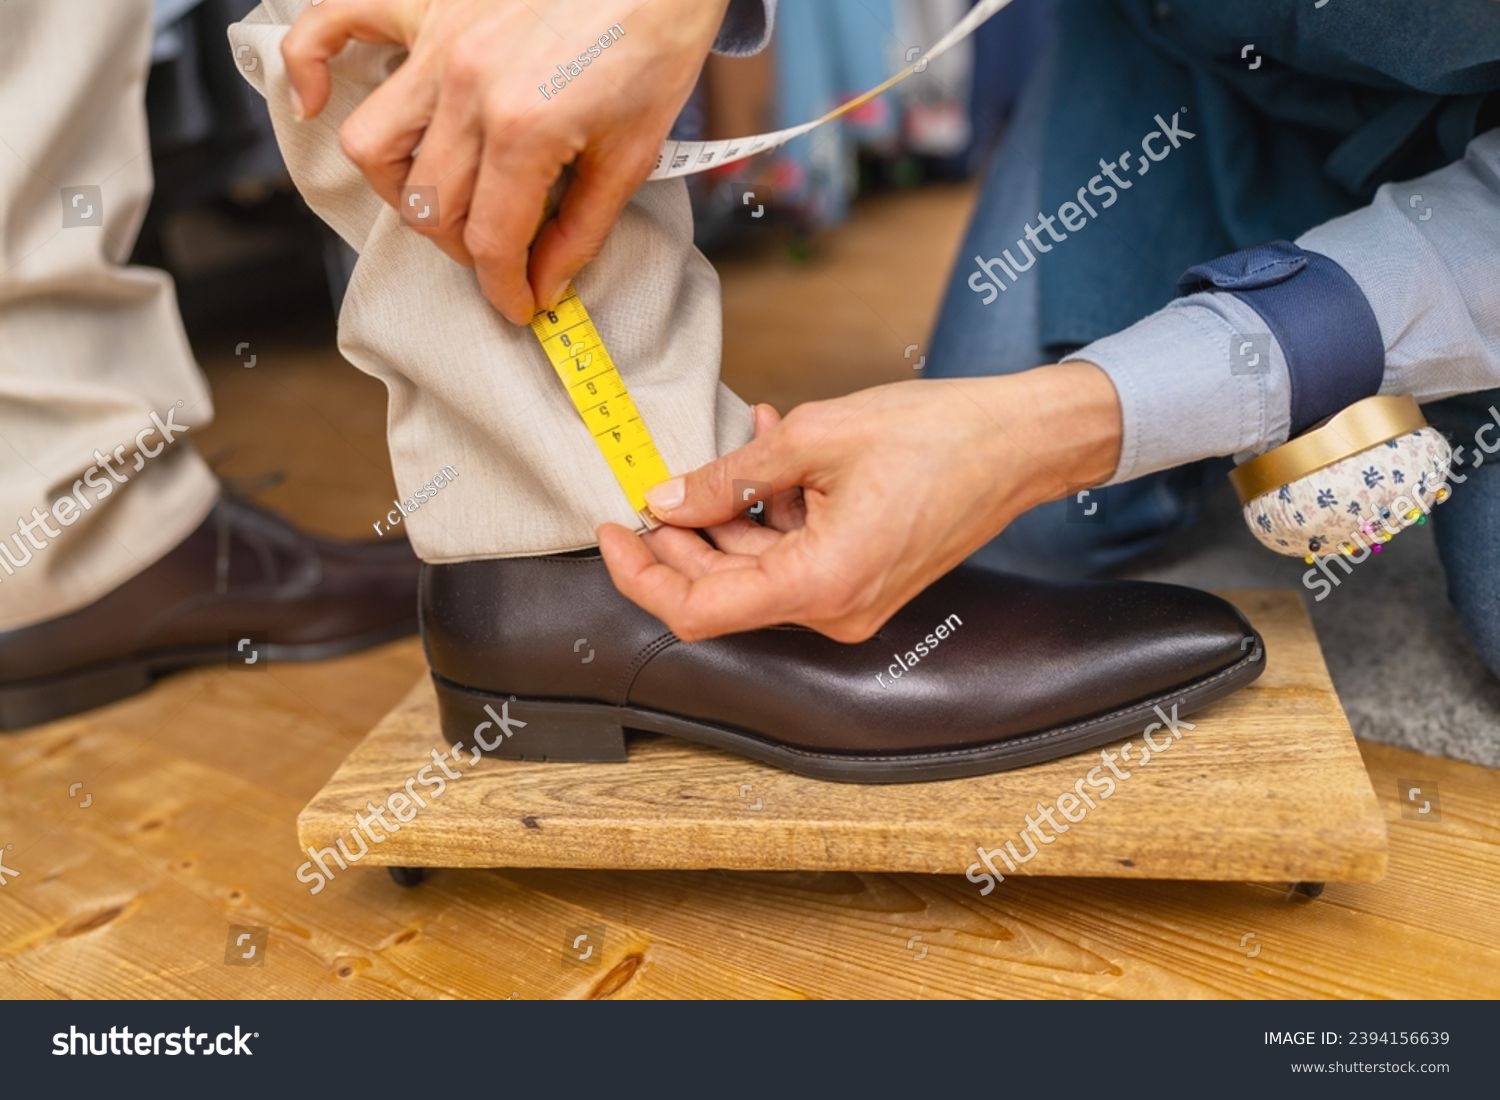 Measuring trouser length with tape on man's ankle above brown shoe #2394156639